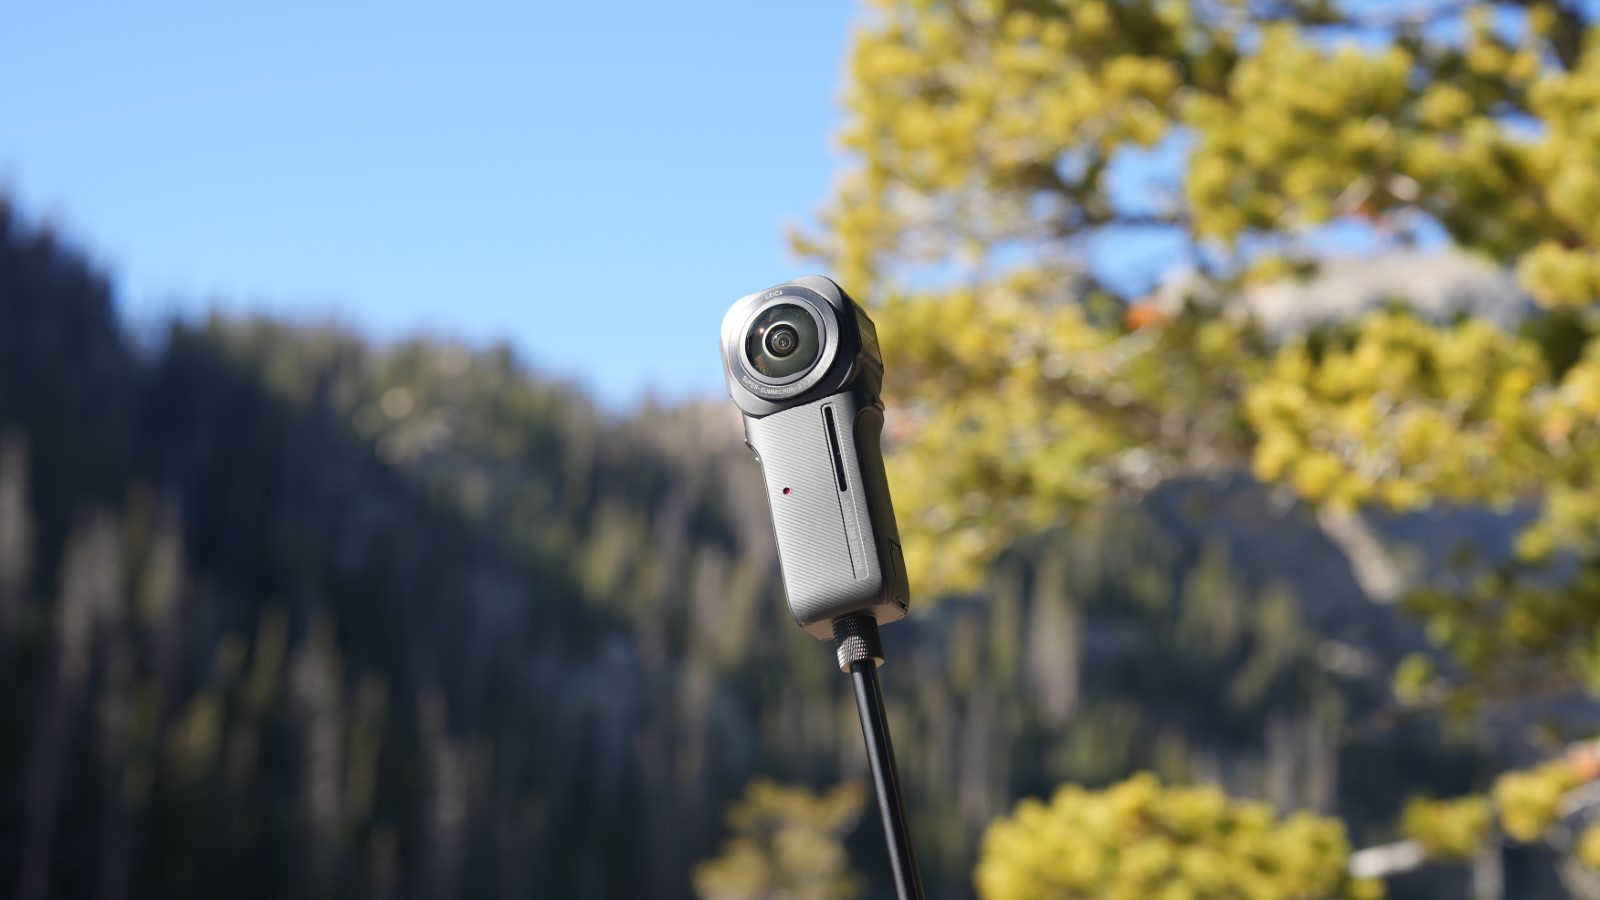 Insta360 One RS Action and 360 Camera Review: The Best of Both Worlds